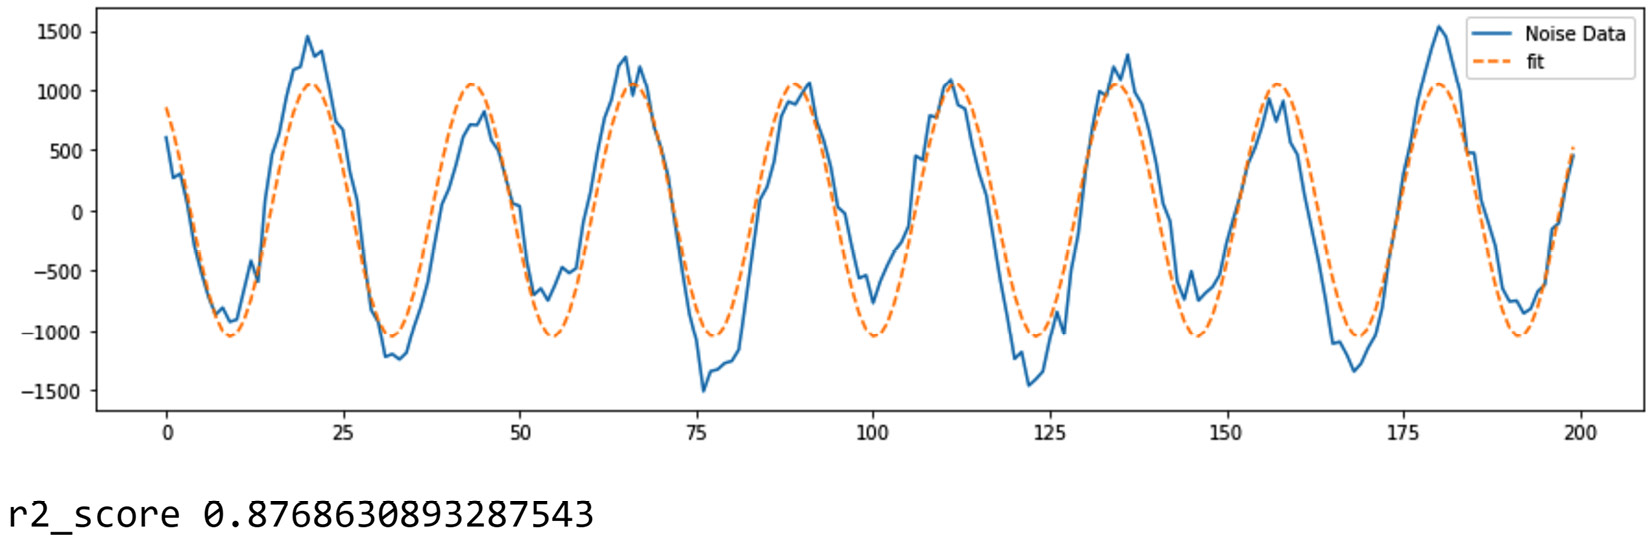 Figure 13.23 – The output of fitting the sinusoidal function to Noise_data.csv 
